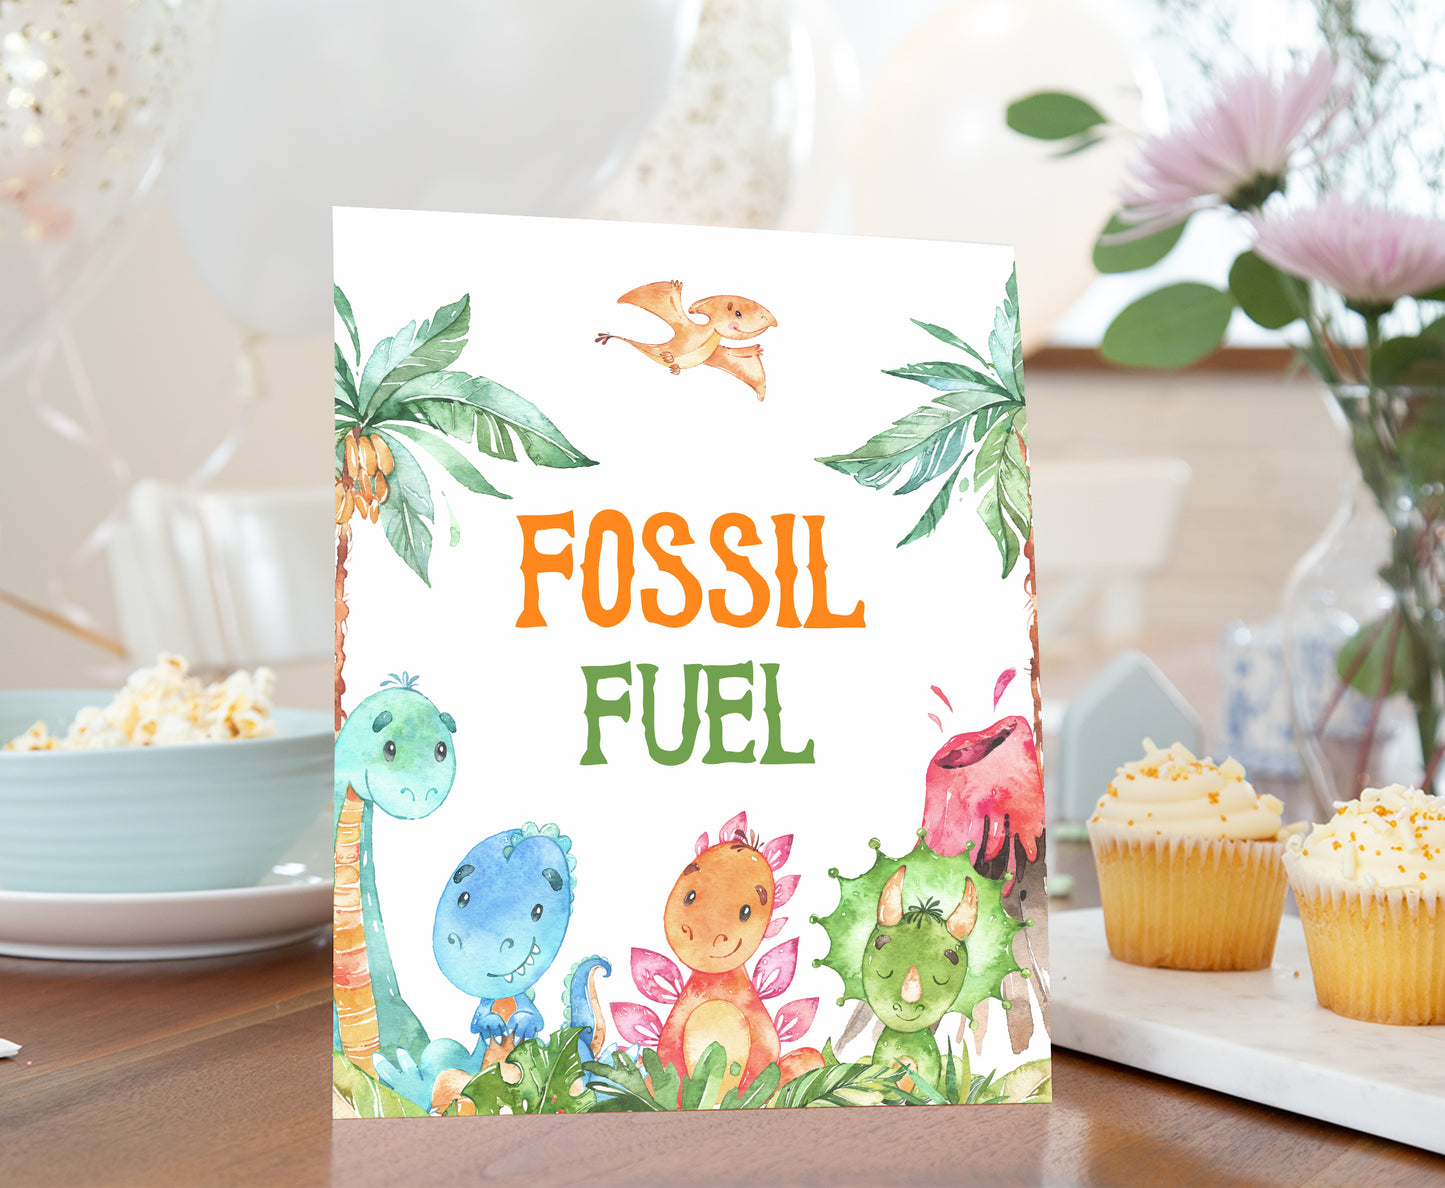 Dinosaur Fossil Fuel Sign | Dinosaur Themed Party Table Decorations - 08A